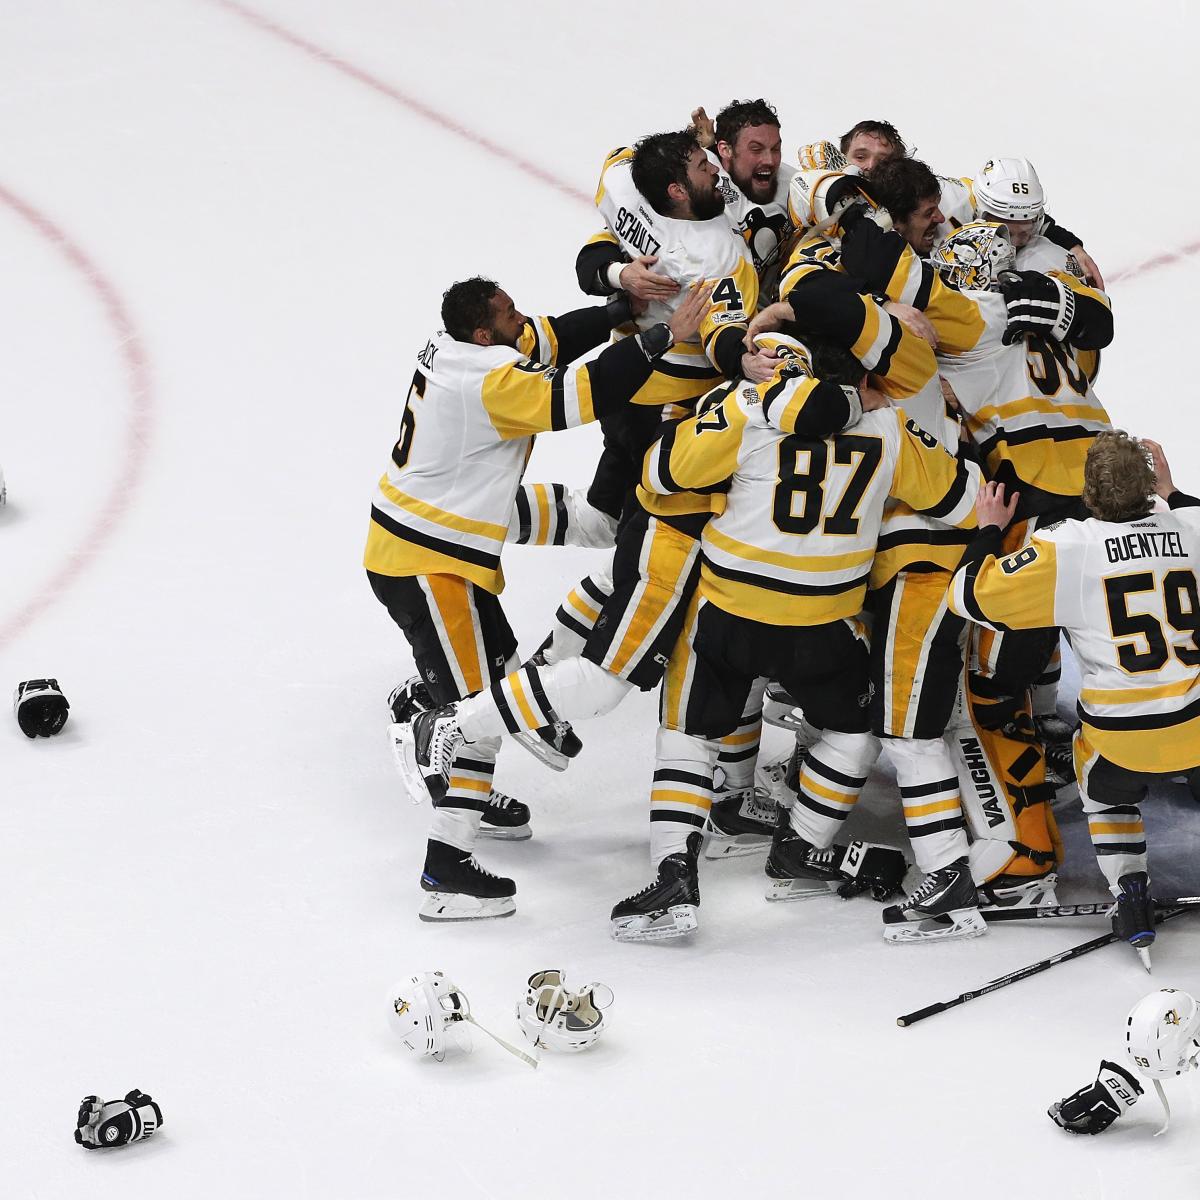 2017 Stanley Cup Final: Game 5 Recap - Pittsburgh Penguins' Home Dominance  Continues in 6-0 Rout - Canes Country